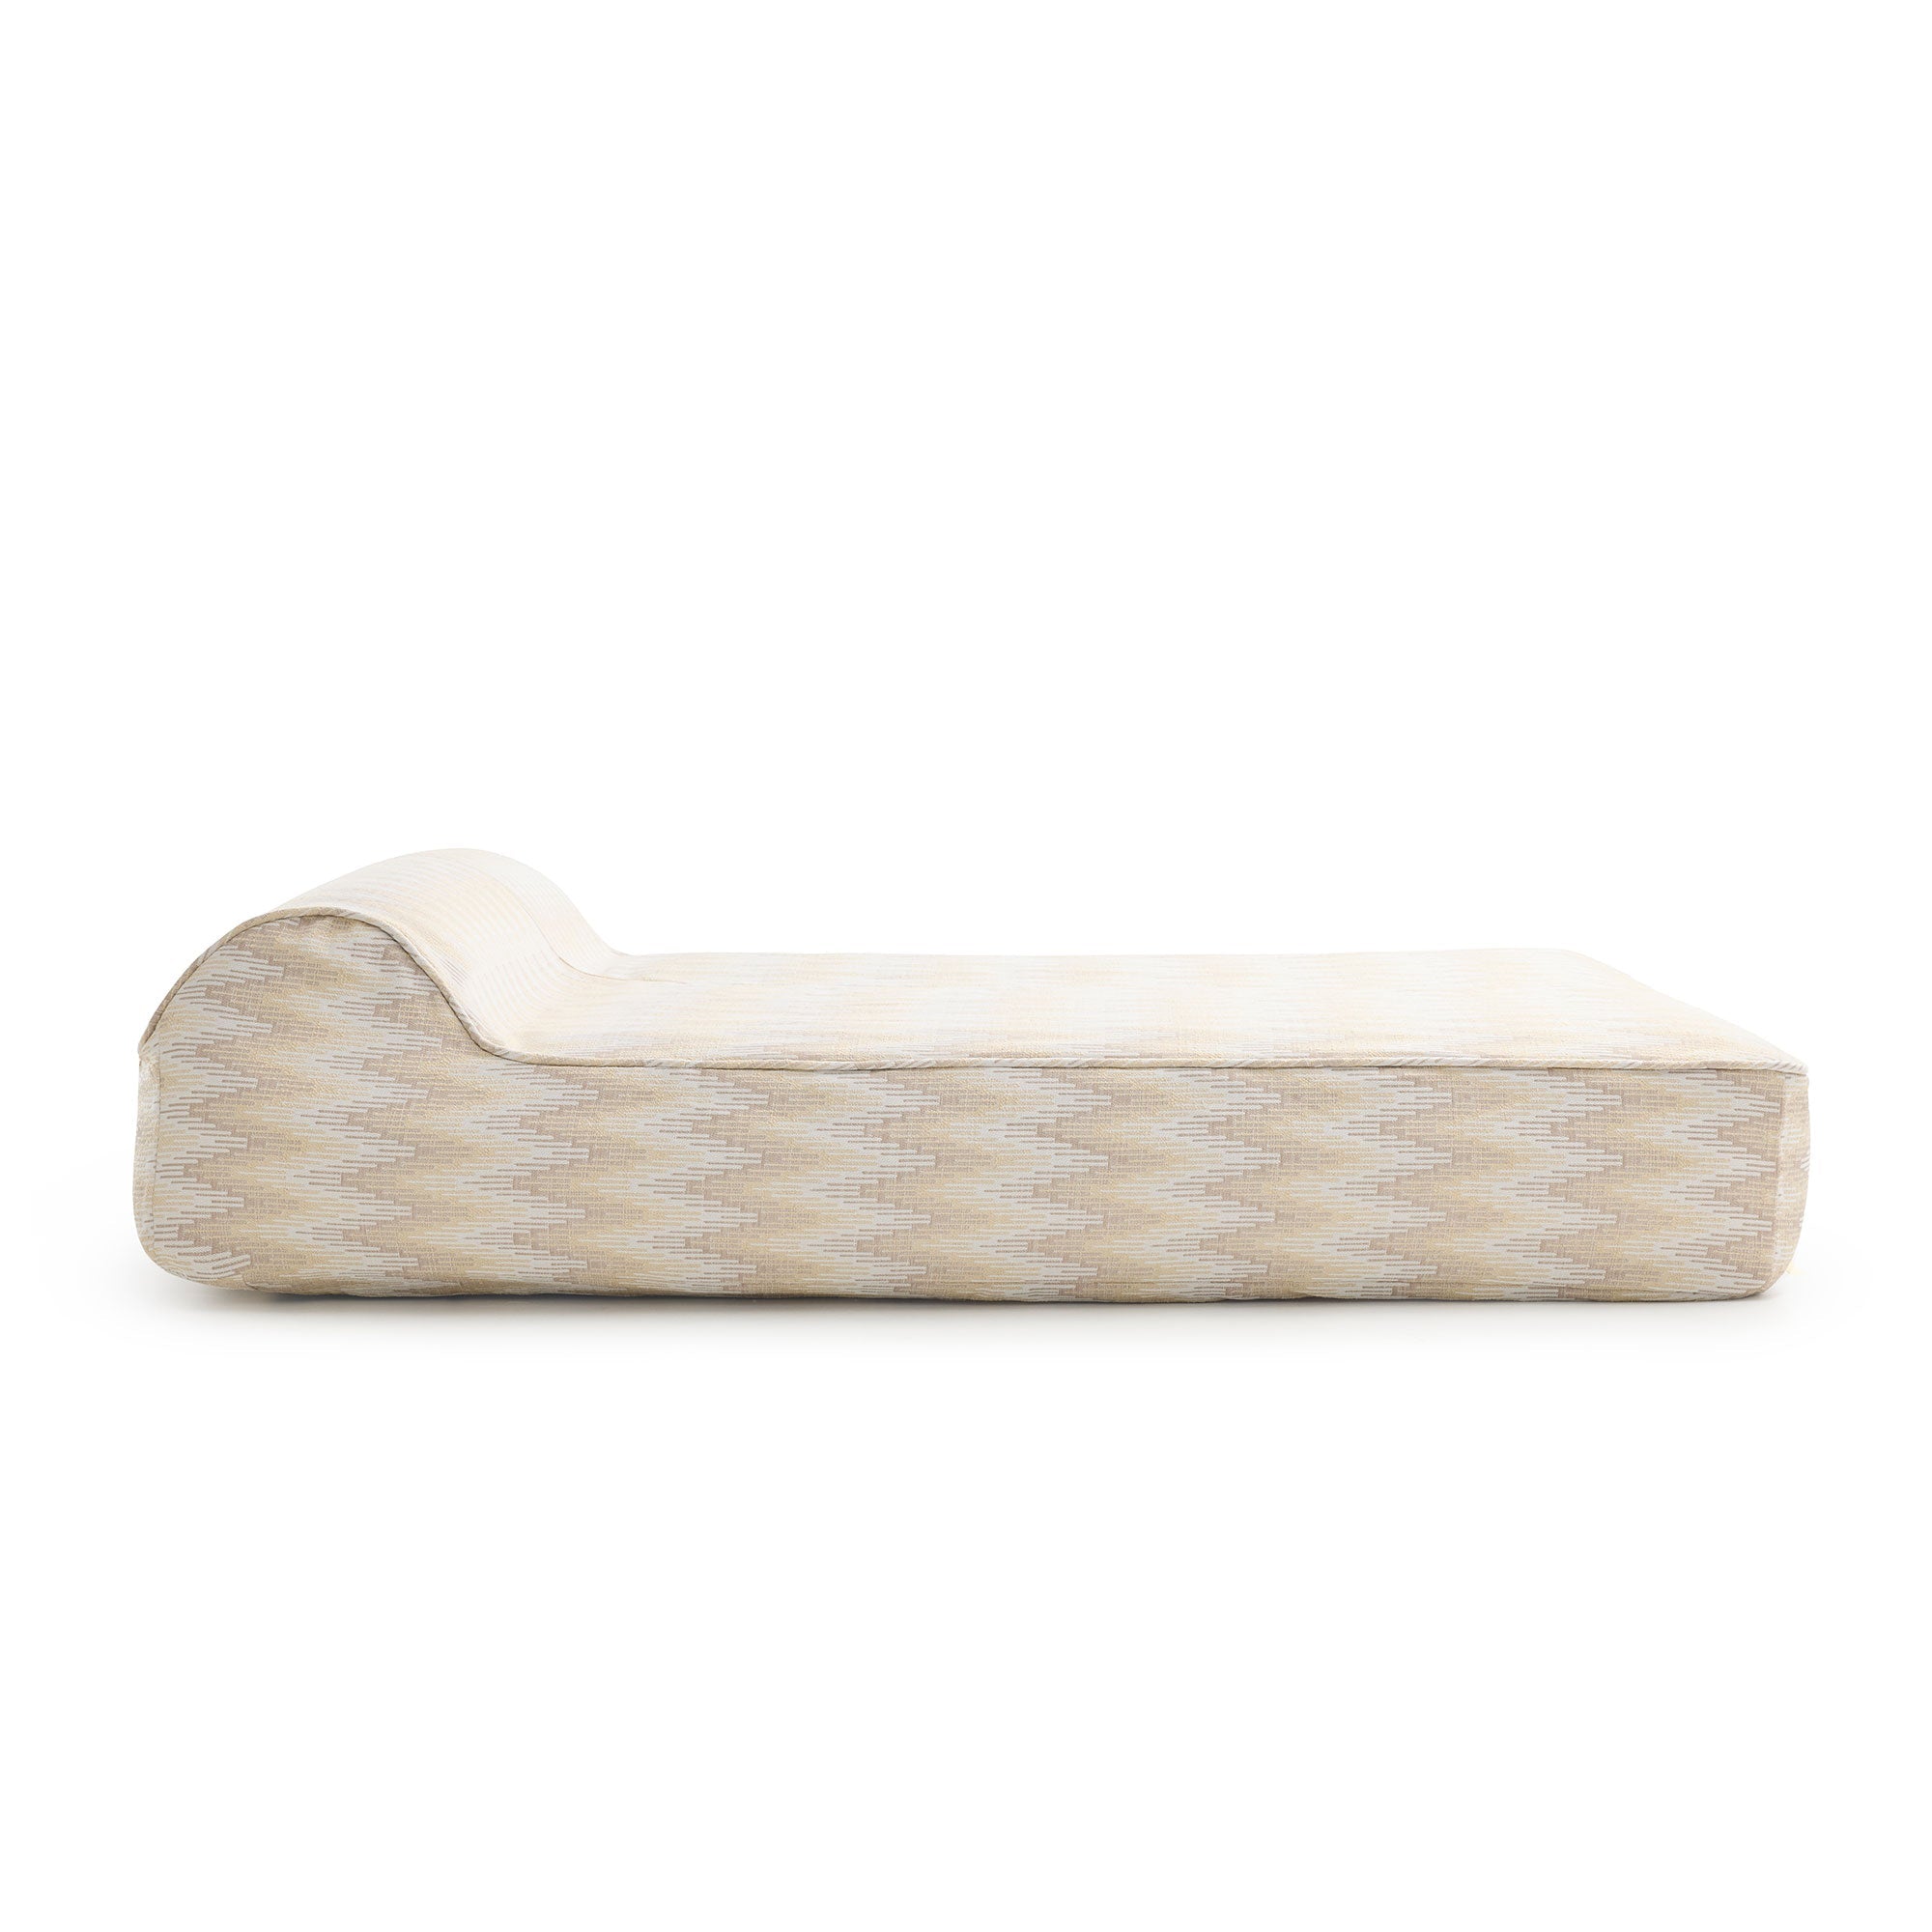 Twin Sunlounger Pintail Zigzag Blue